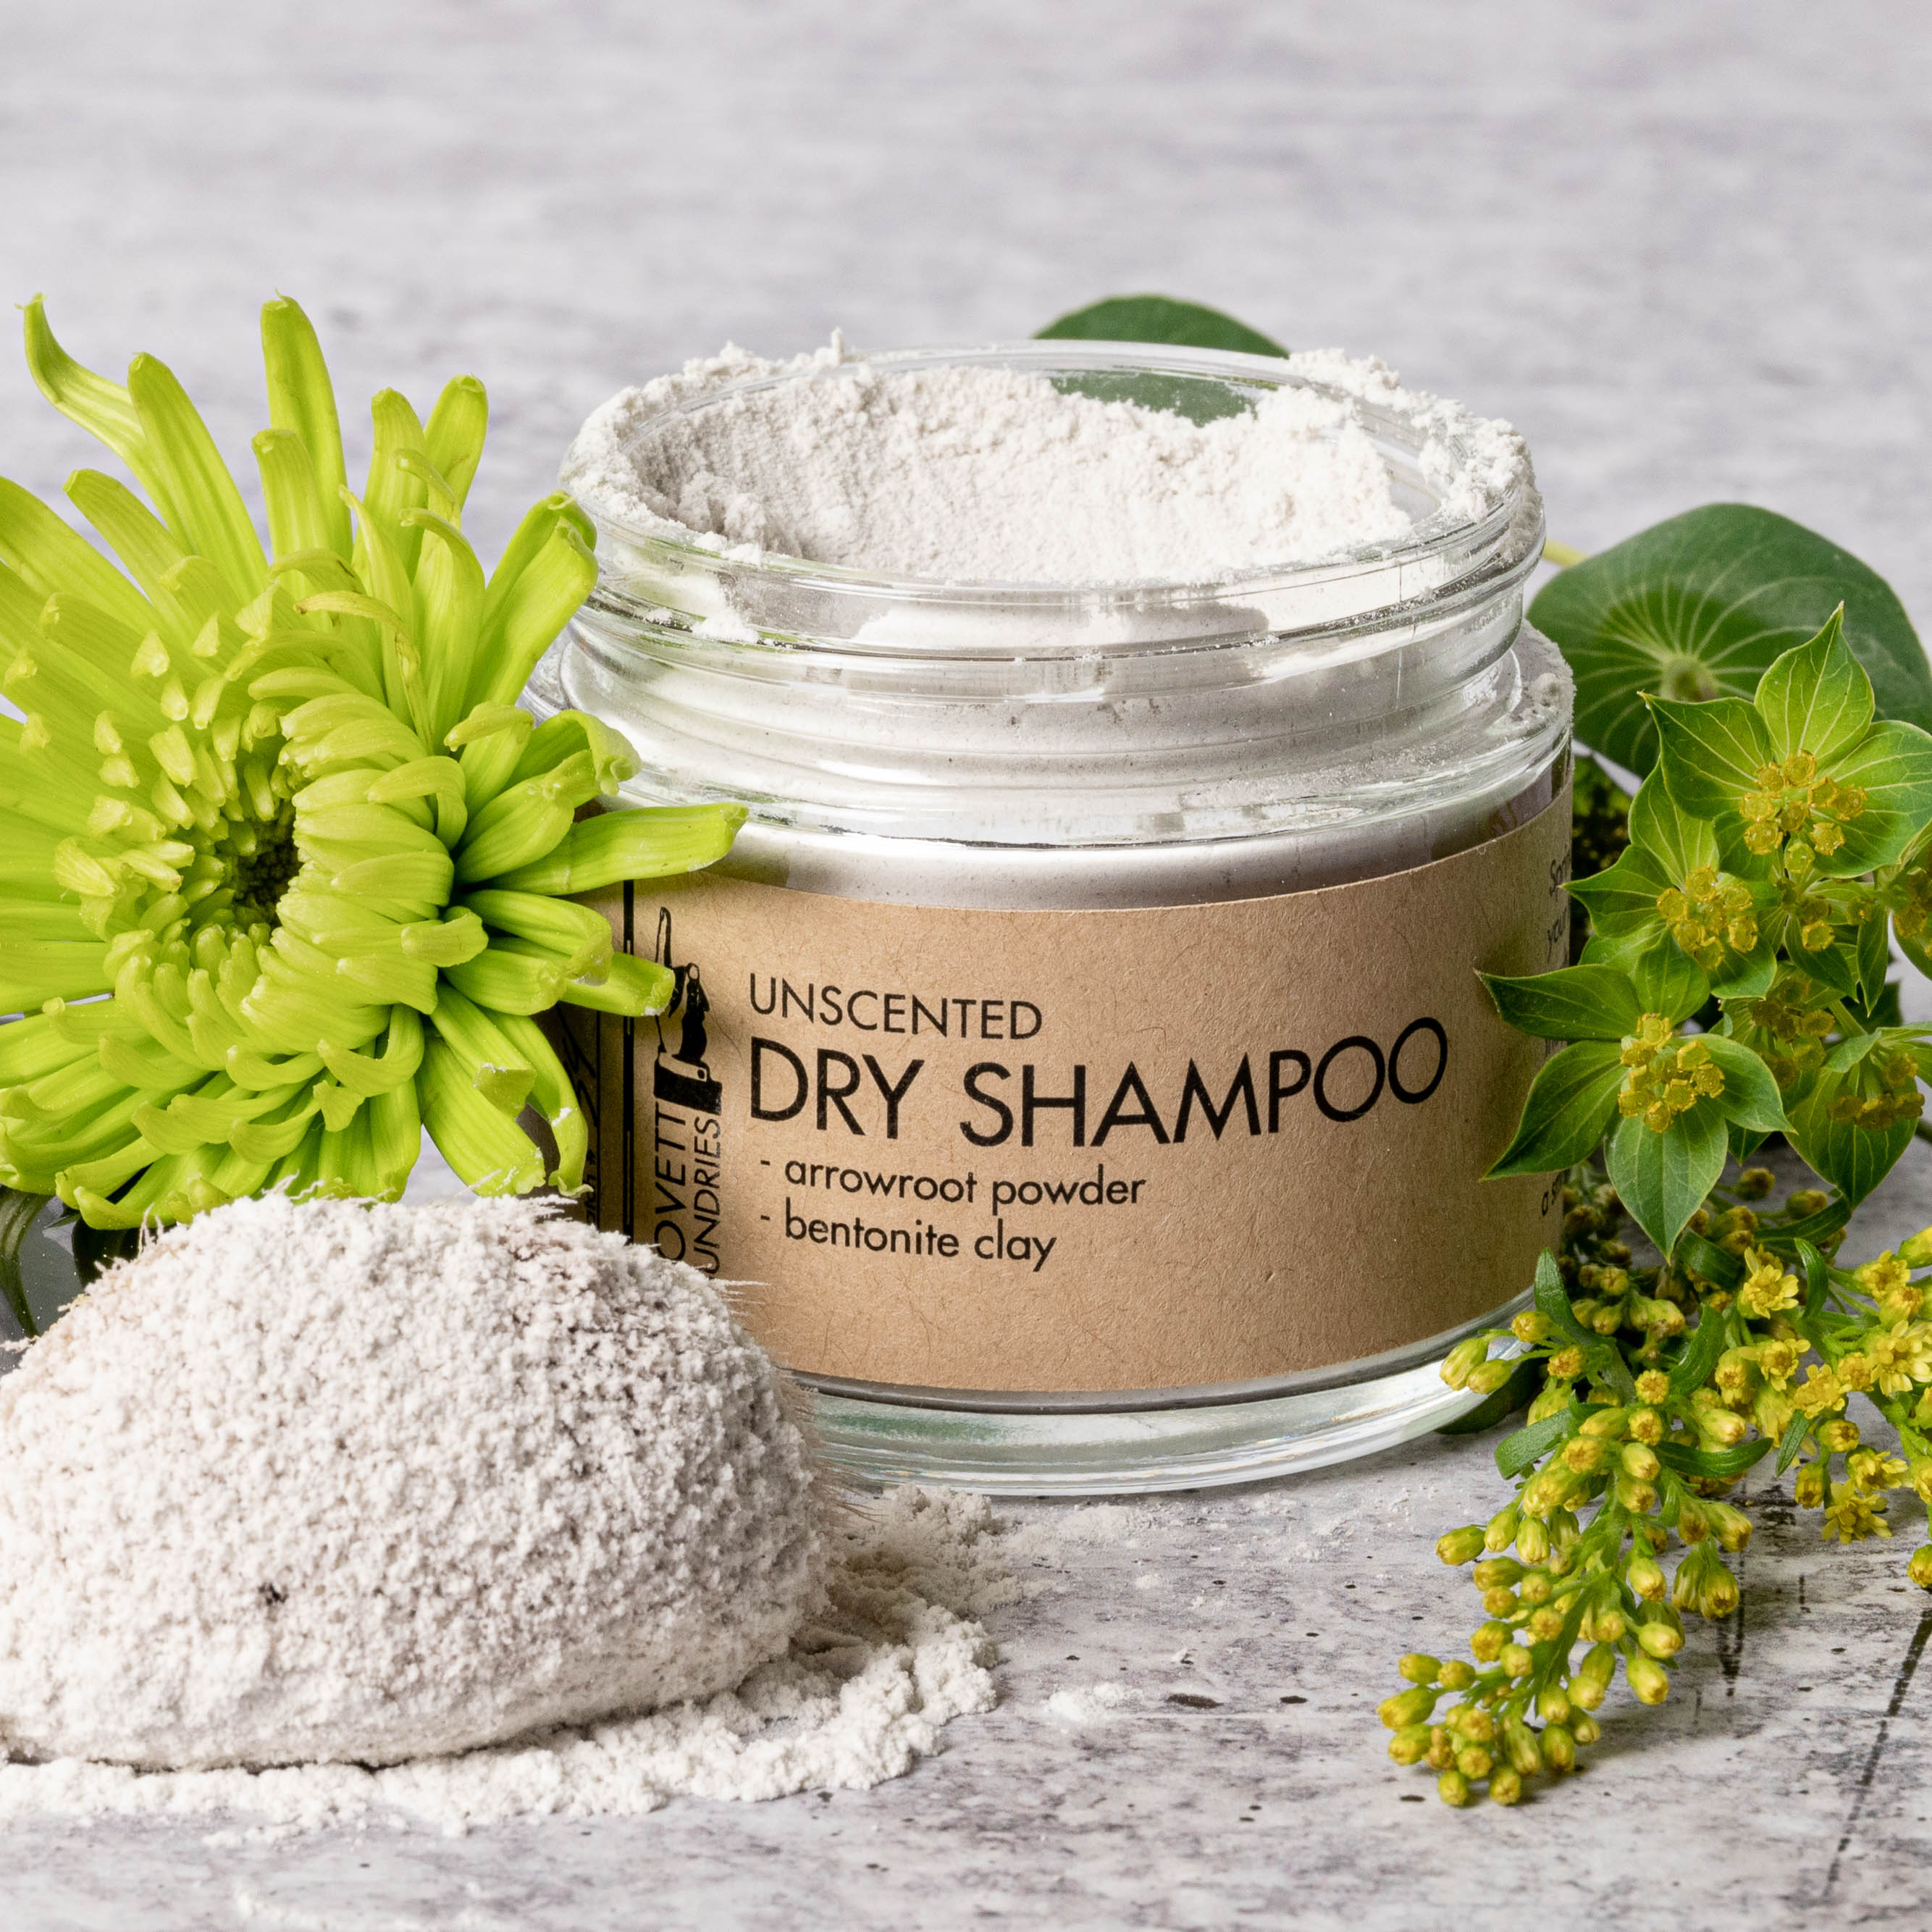 A glass jar of unscented natural dry shampoo surrounded by plants and clay